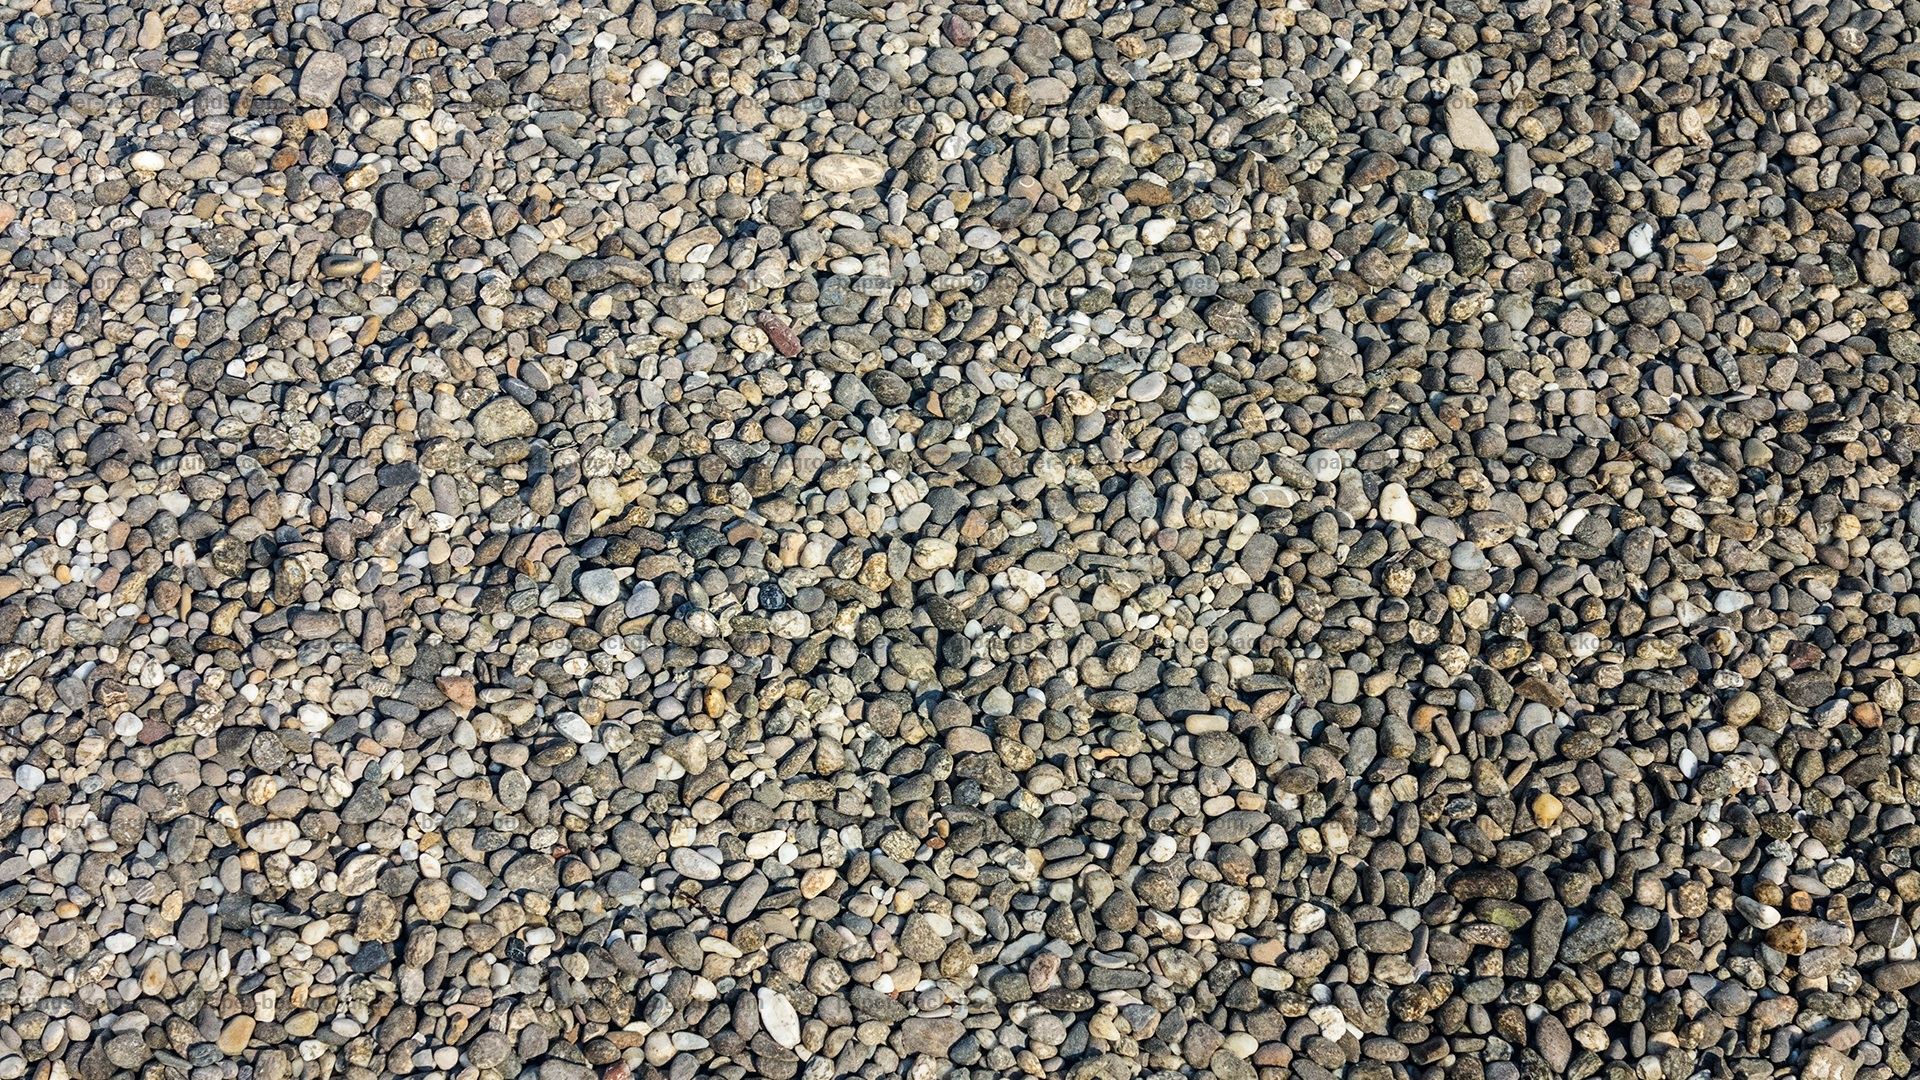 Images of Gravel | 1920x1080